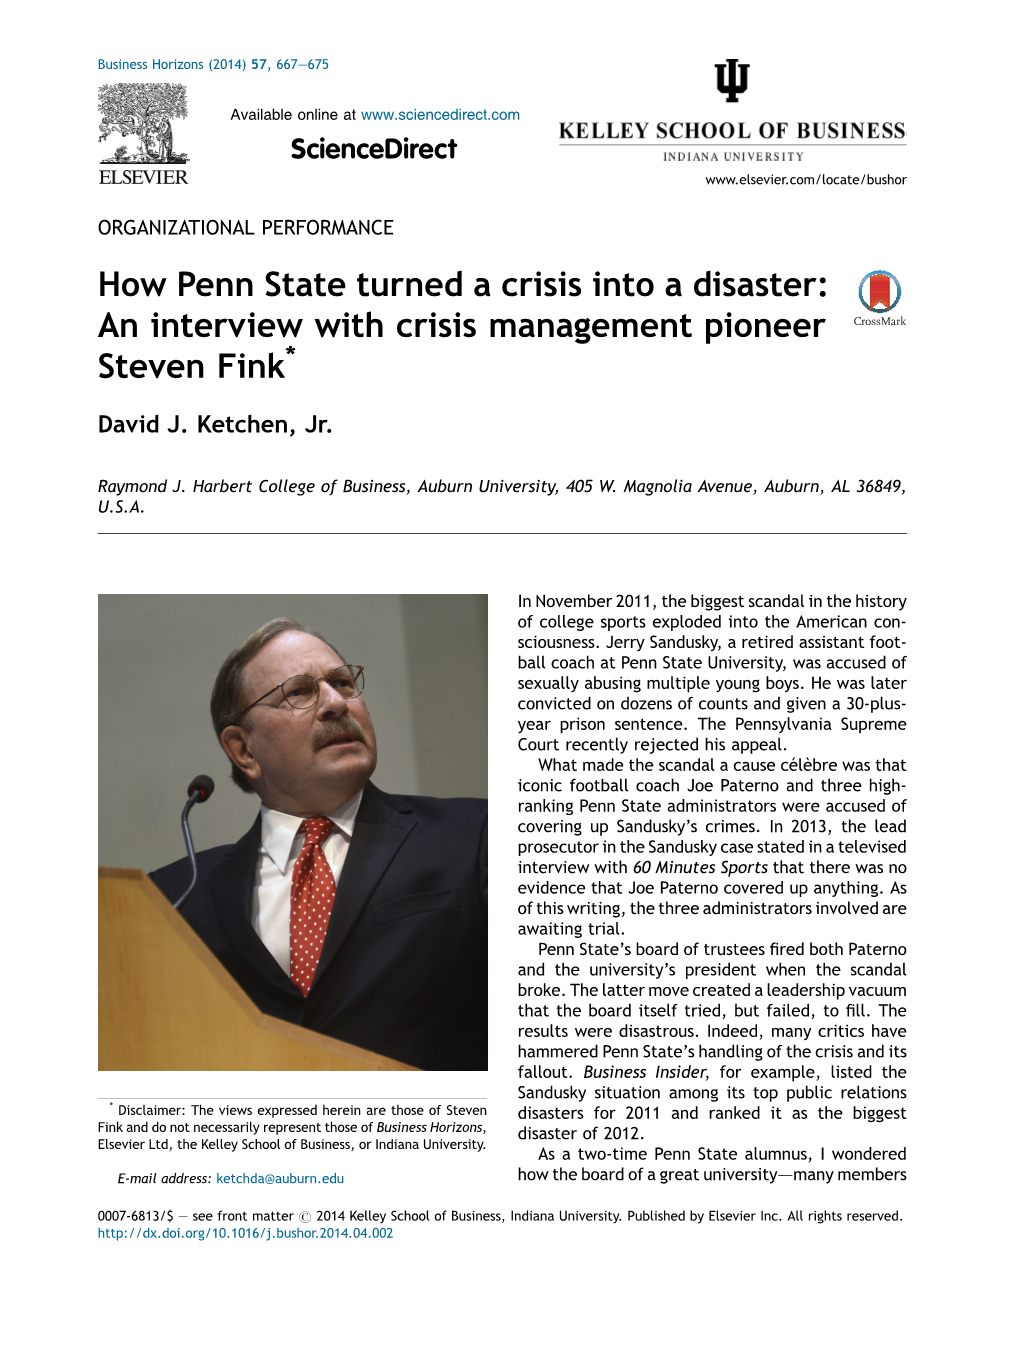 An Interview with Crisis Management Pioneer Steven Fink